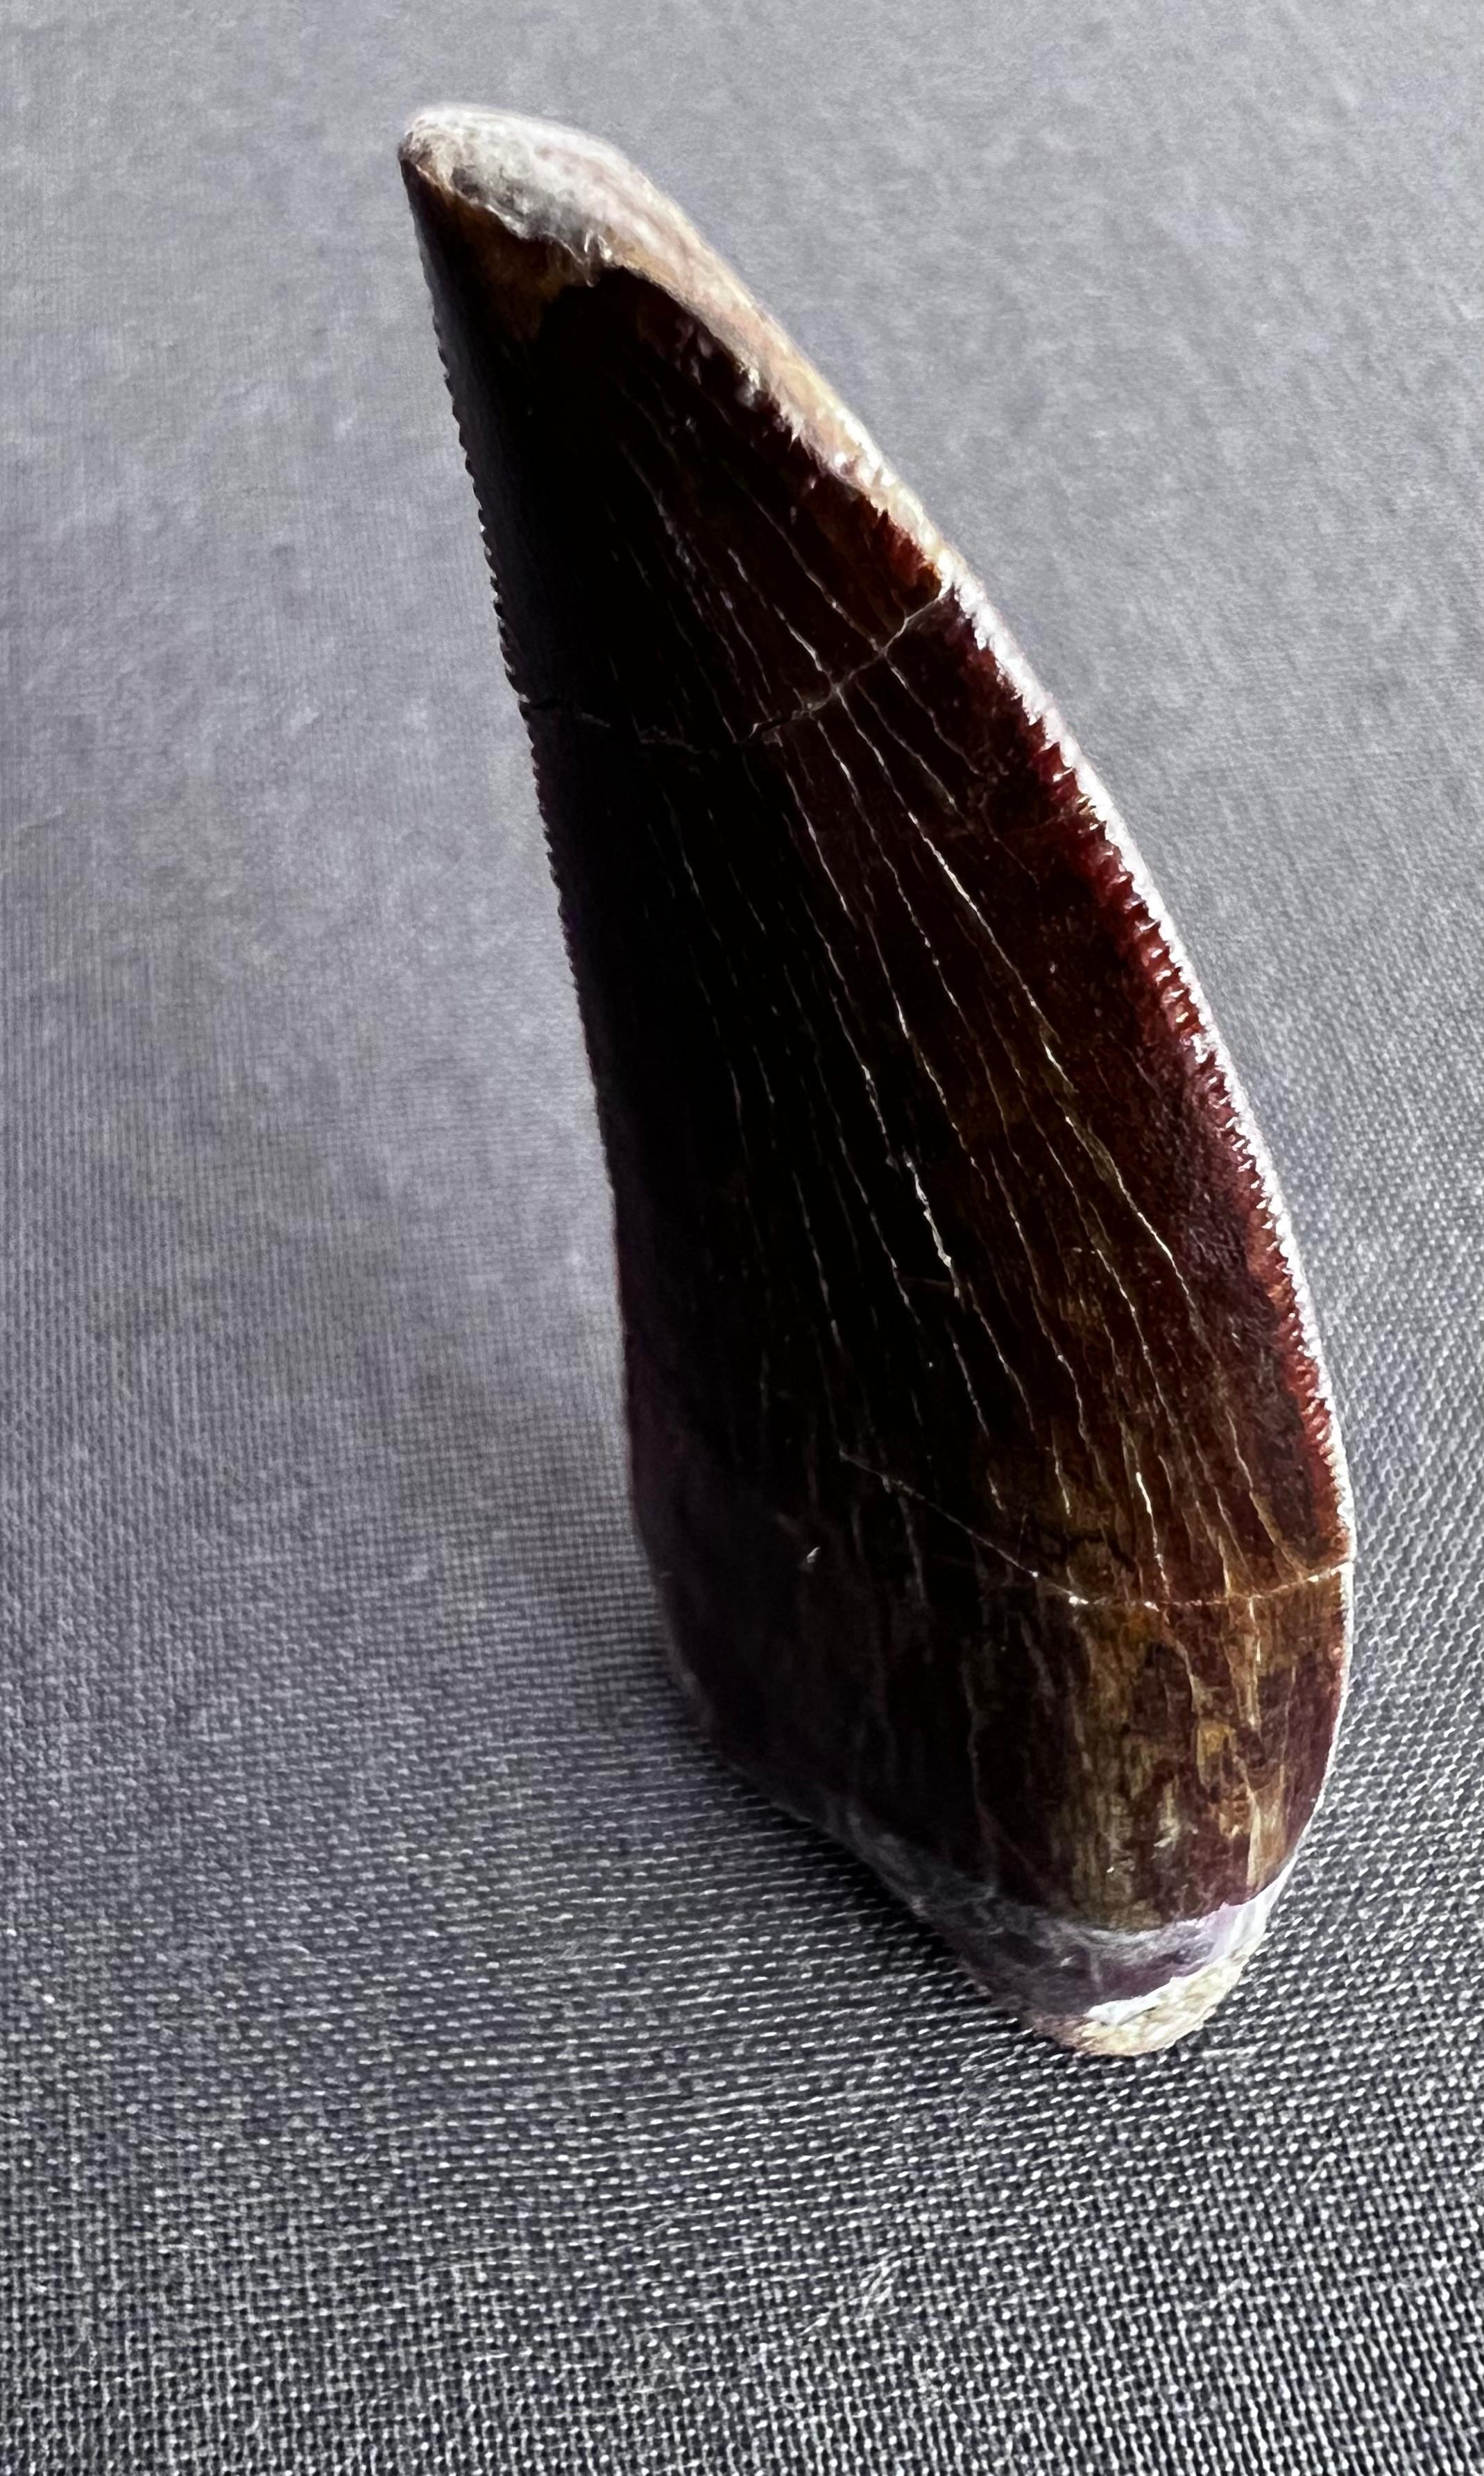 North African Selected Tooth of Carcharodontosaurus Dinosaur For Sale